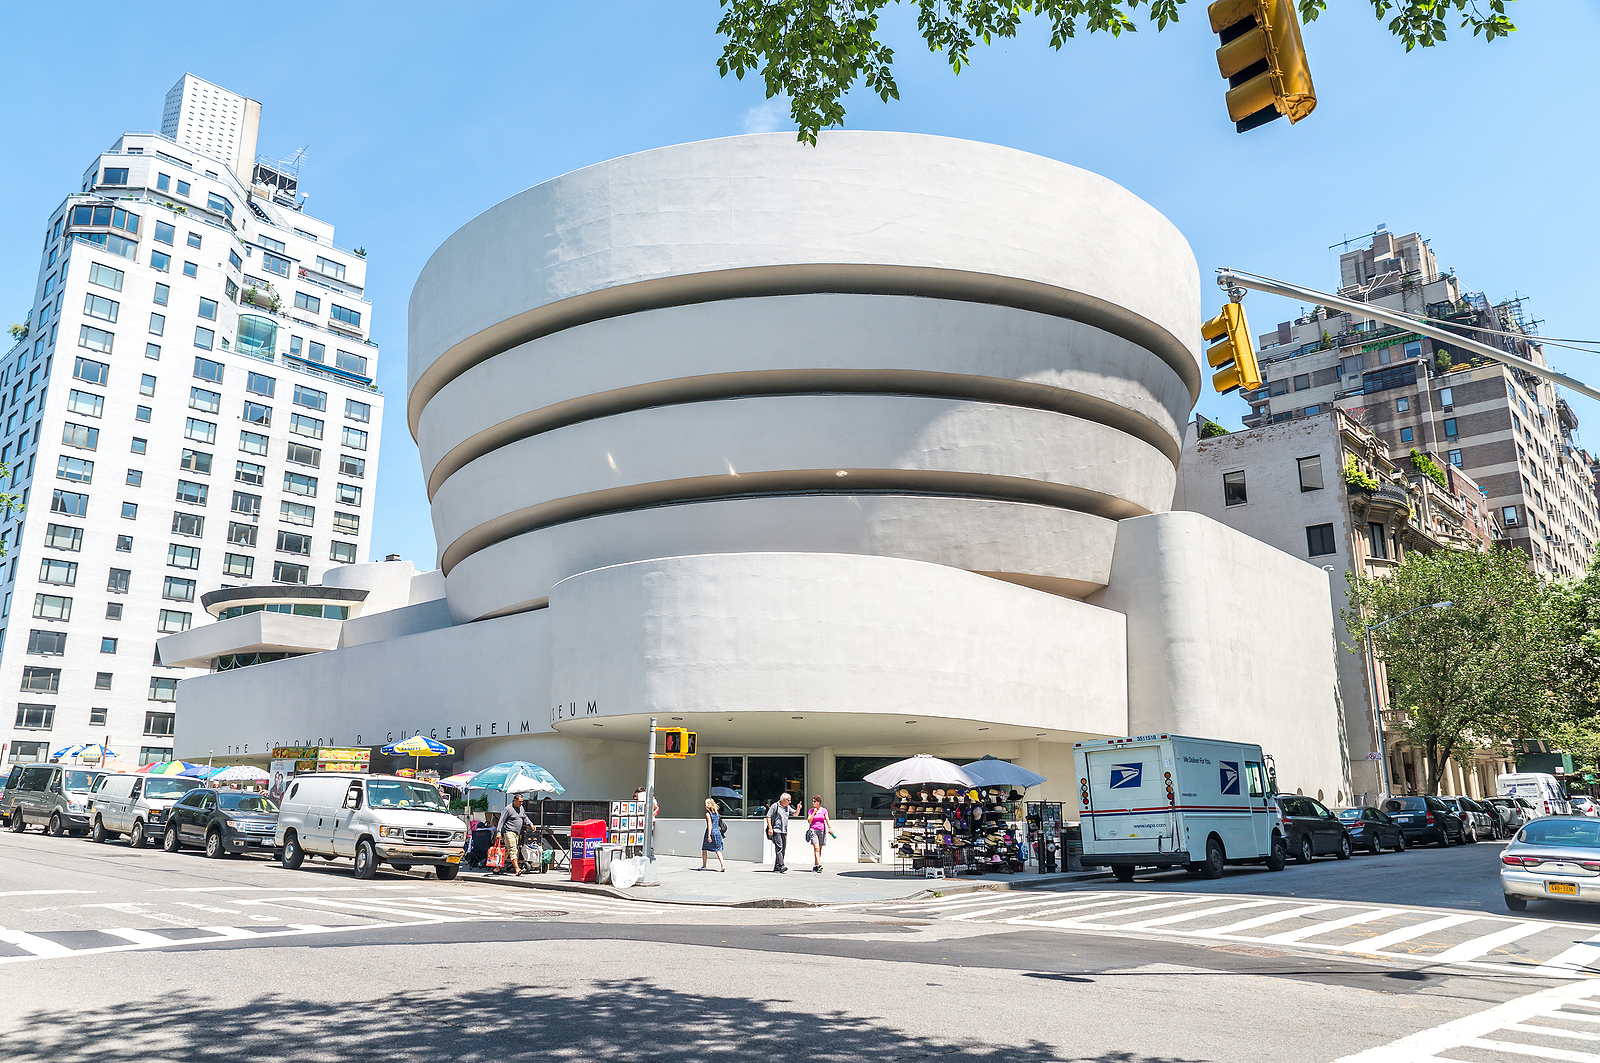 Top 5 Best Museums in New York City You Will Want to Visit